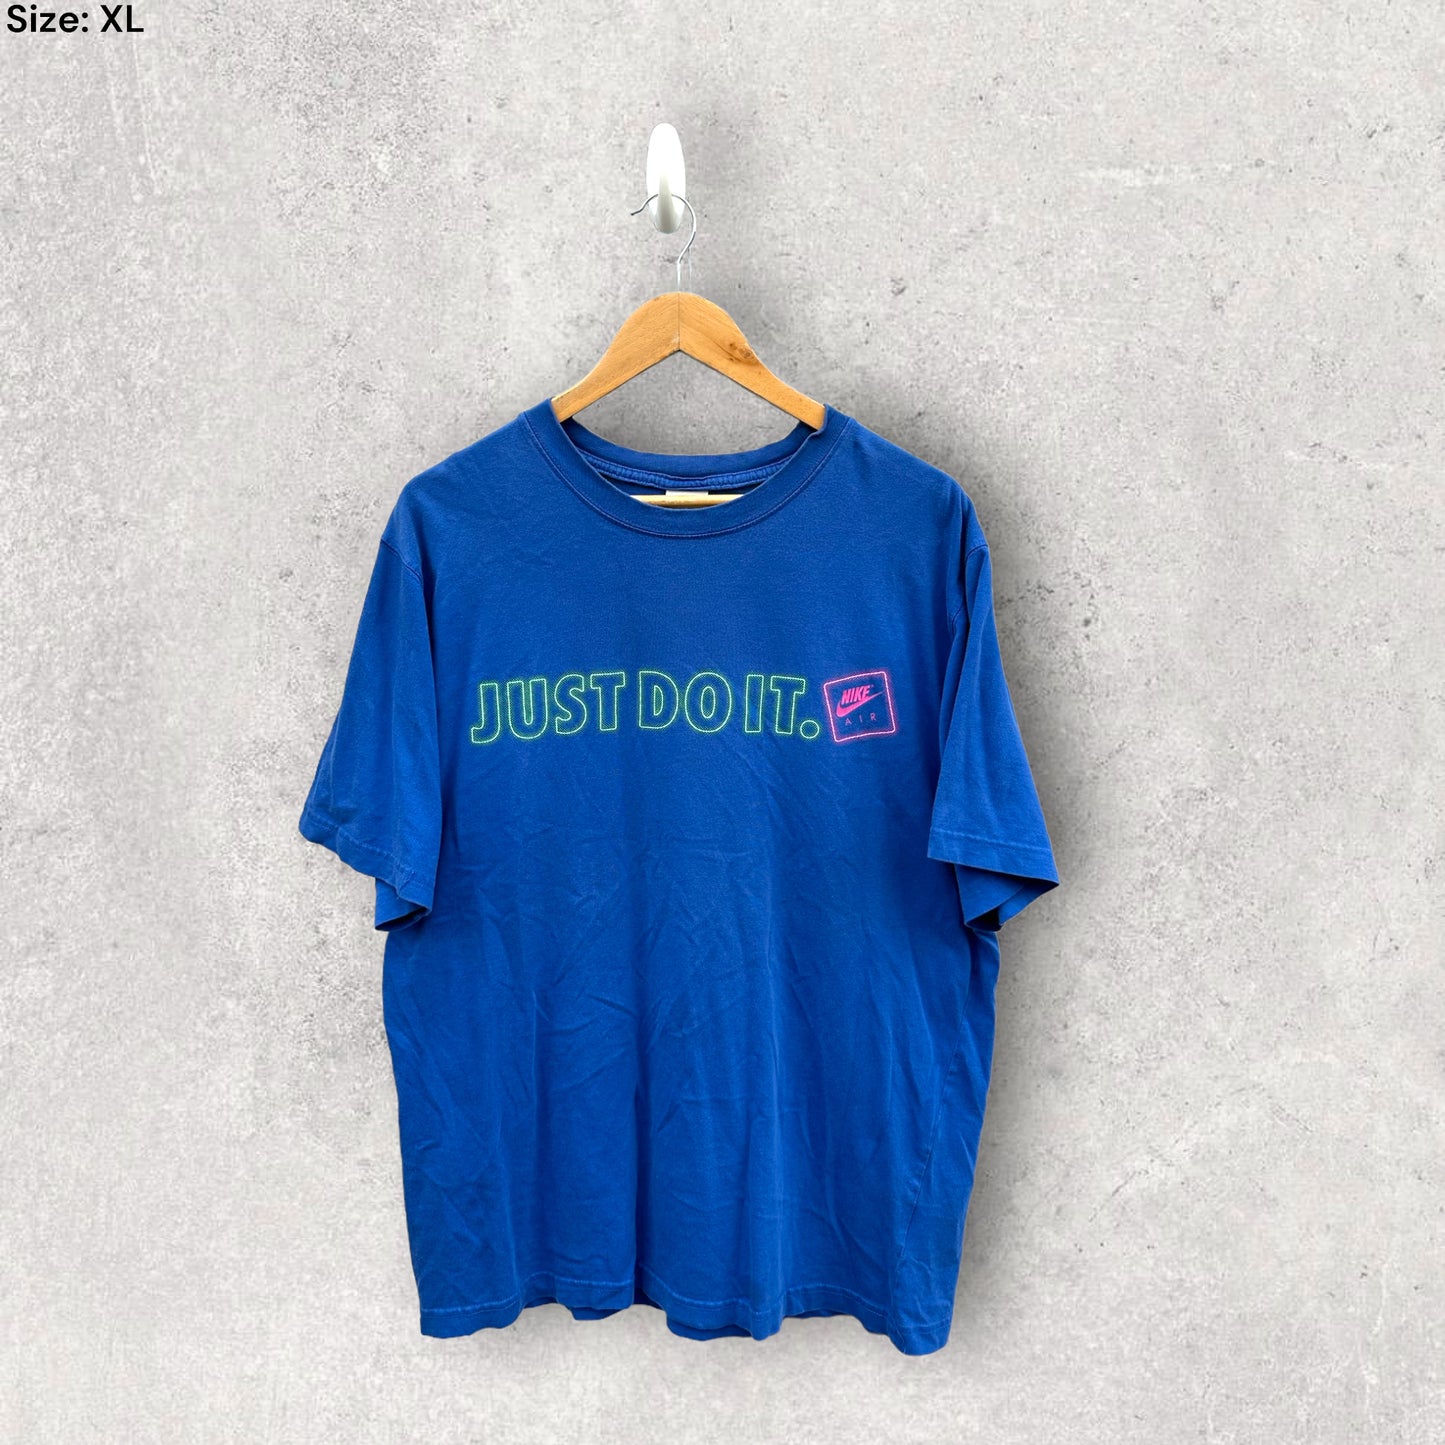 NIKE AIR 'JUST DO IT' VINTAGE T-SHIRT